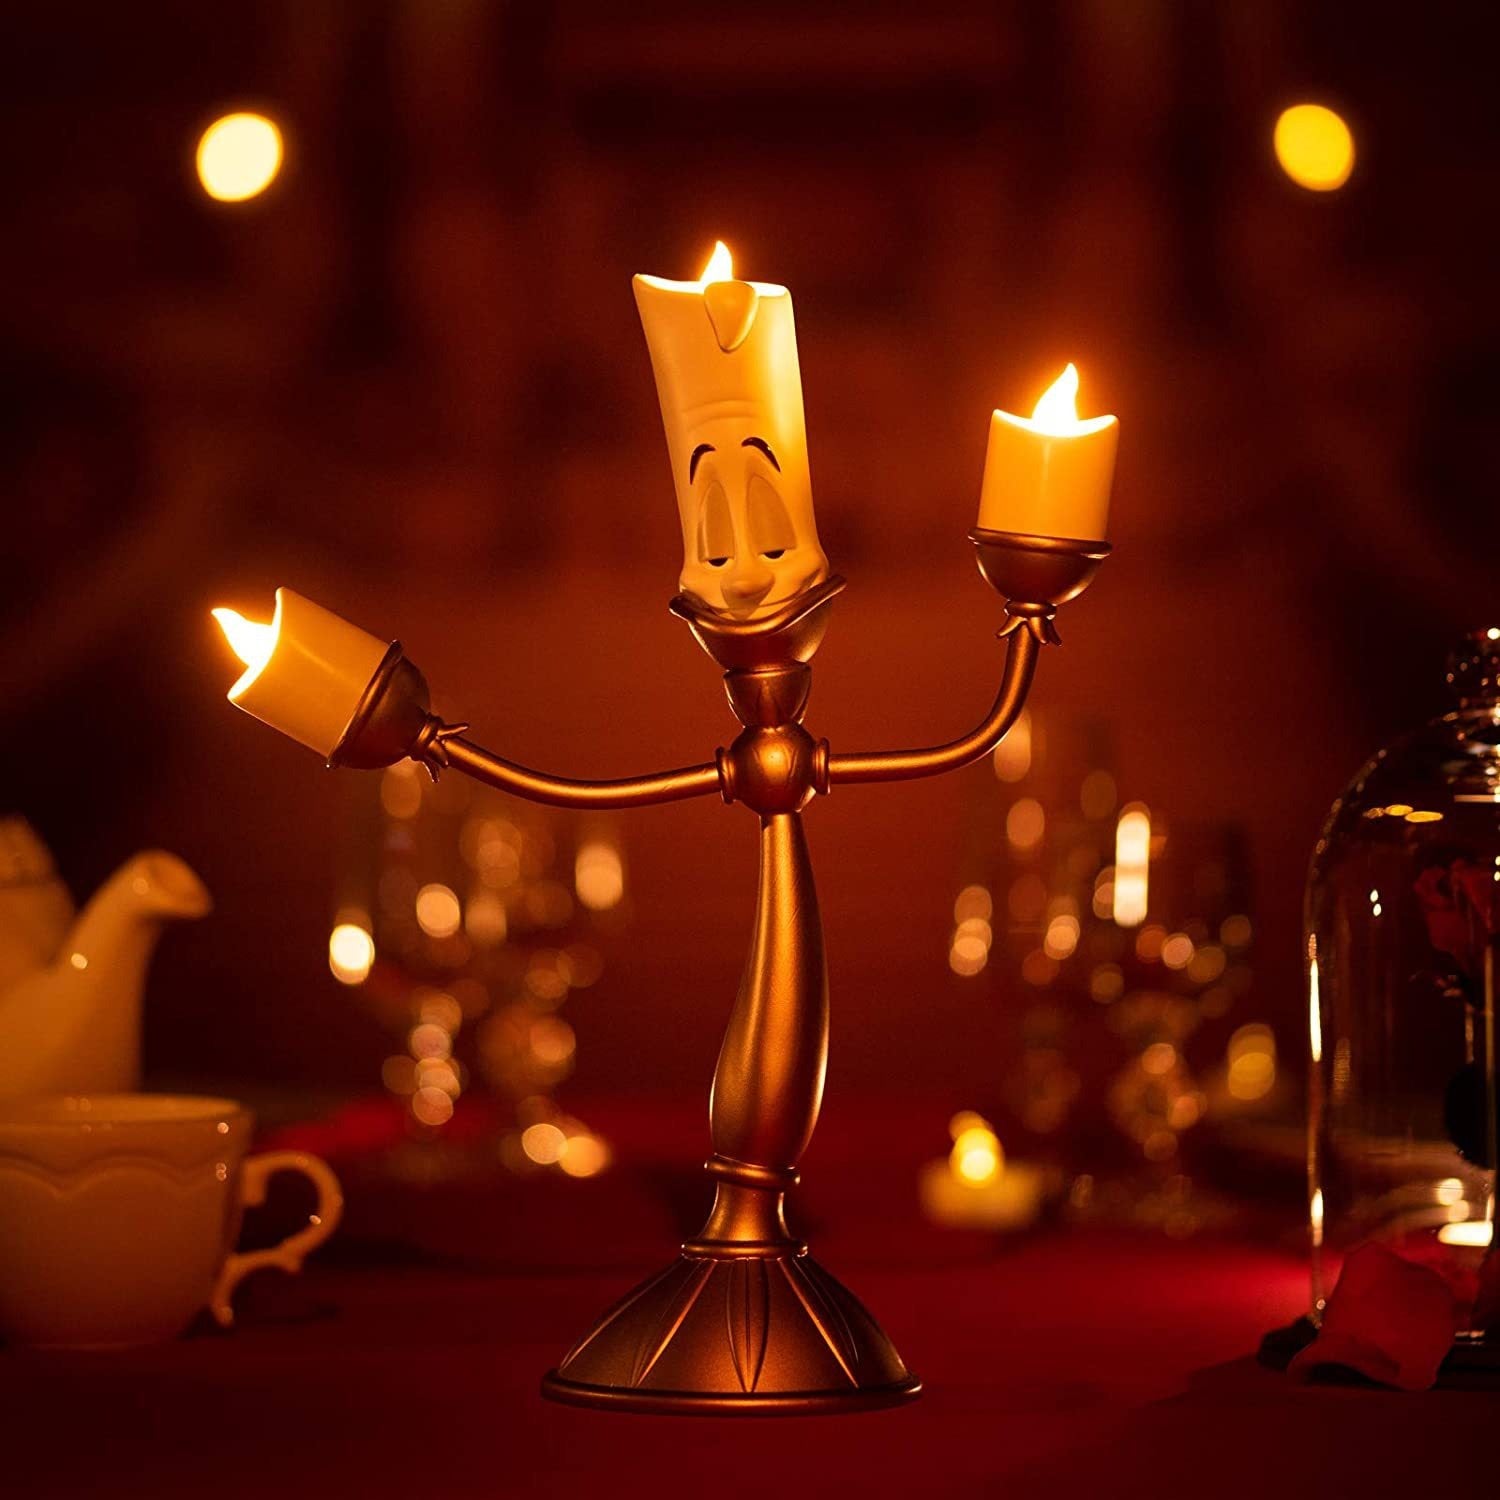 A gold candlestick which looks exactly like Lumiere from Beauty and the Beast. He is holding 2 lit LED candles and has one on his head and appears to be dancing.